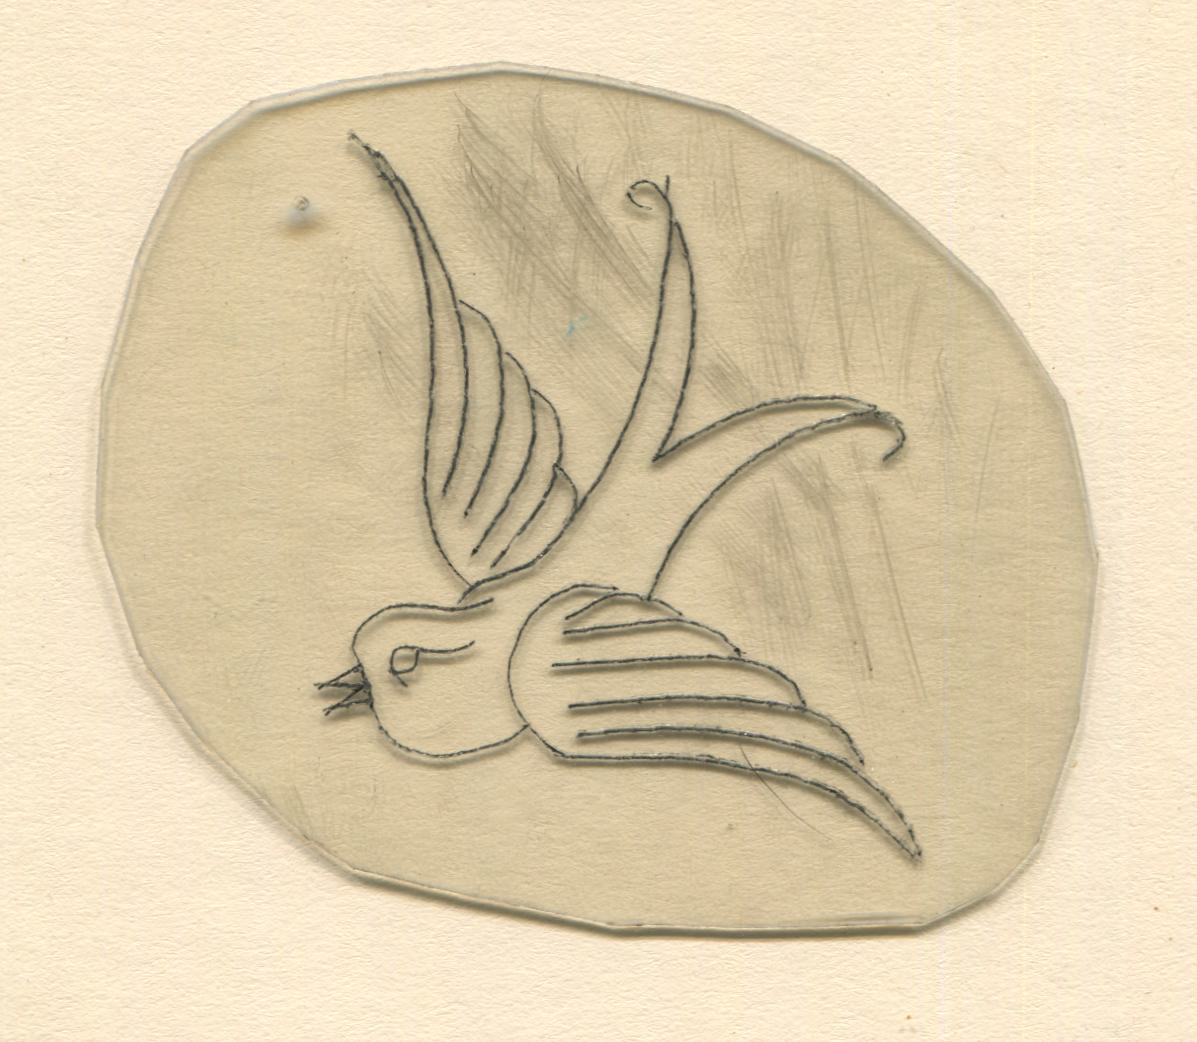 Swallow Bird Vintage Traditional Tattoo Acetate Stencil from Bert Grimm's Shop